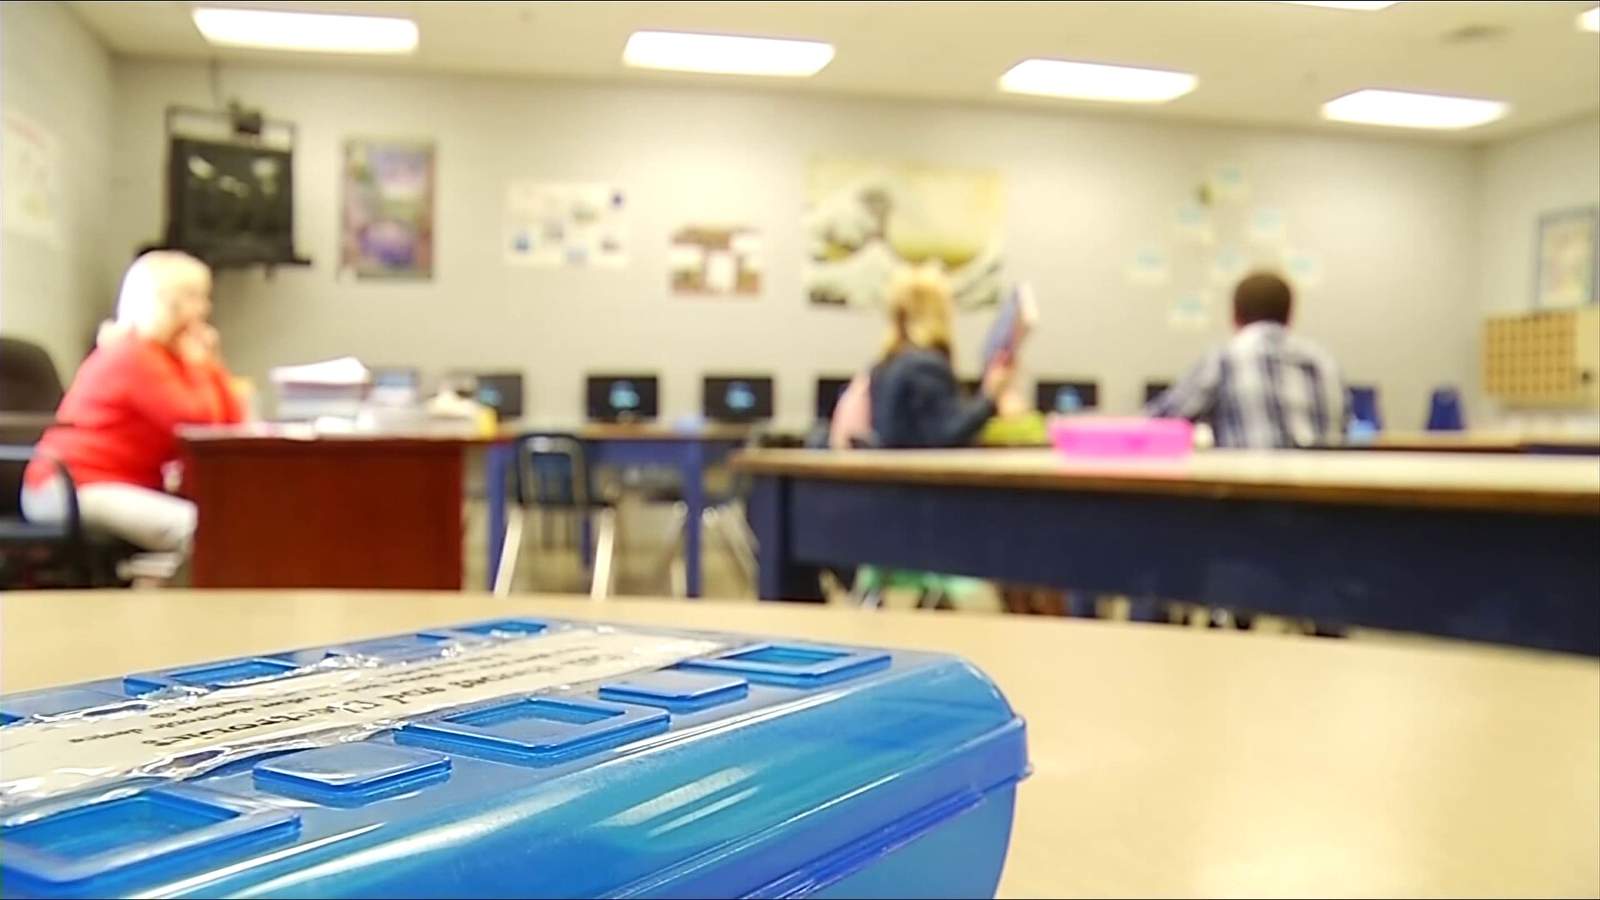 Mixed reactions to virtual learning requirement for Virginia schools reopening